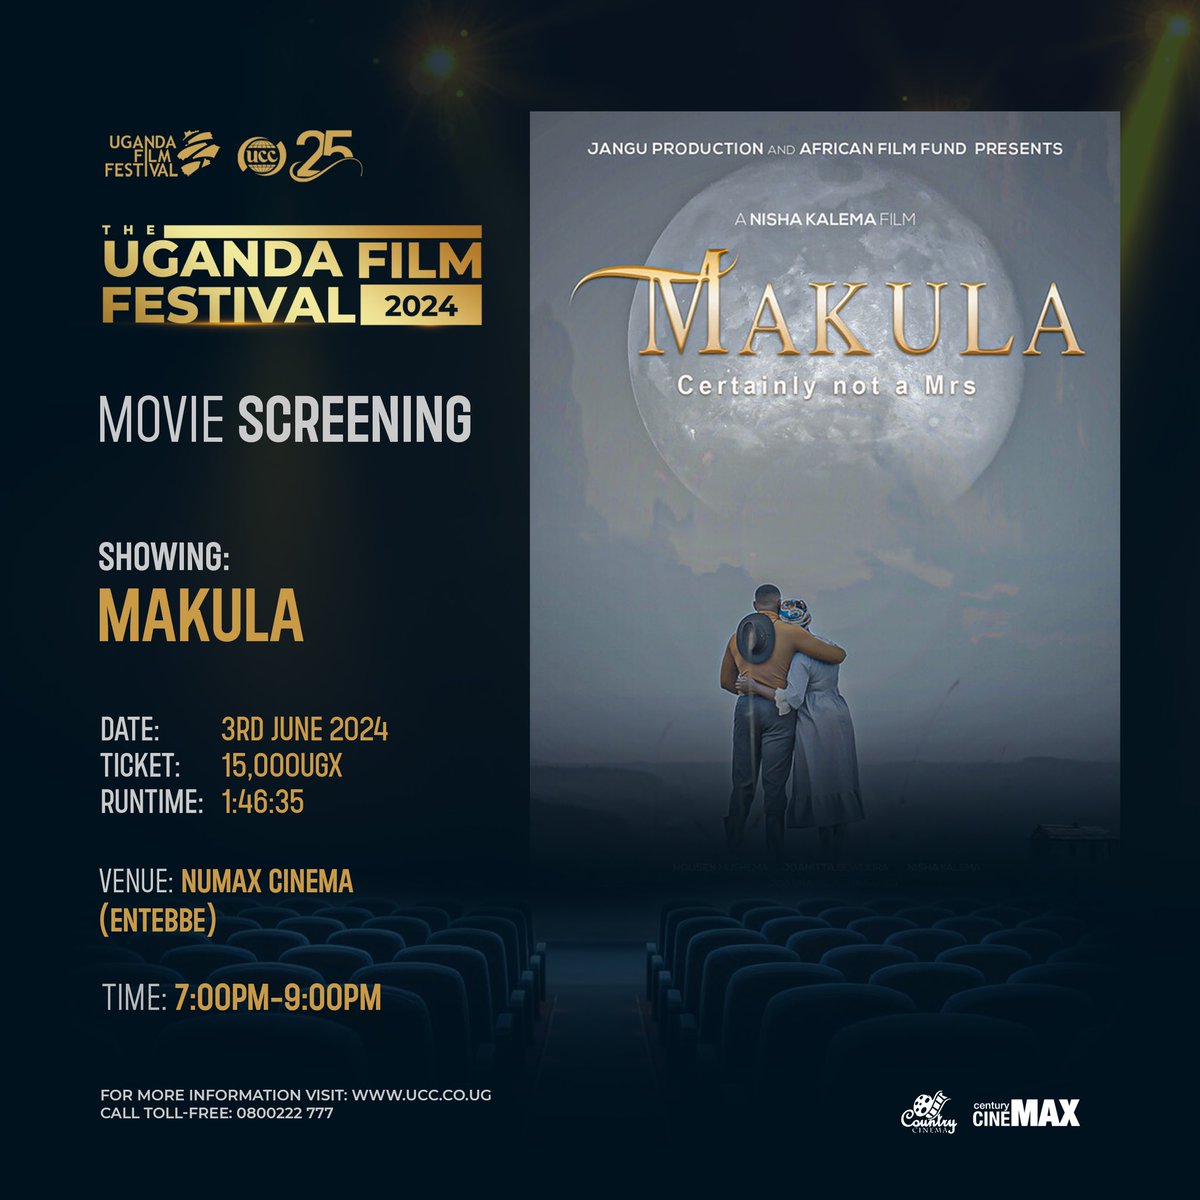 MAKULA, a film by @Nishakalema  that follows an extensive yet secret ring of human and organ traffickers. 

Movie screening will be 3rd June 2024 at Numax Cinema in Entebbe for only 15k.  #UFF2024 

#LocalStoriesGlobalimpact